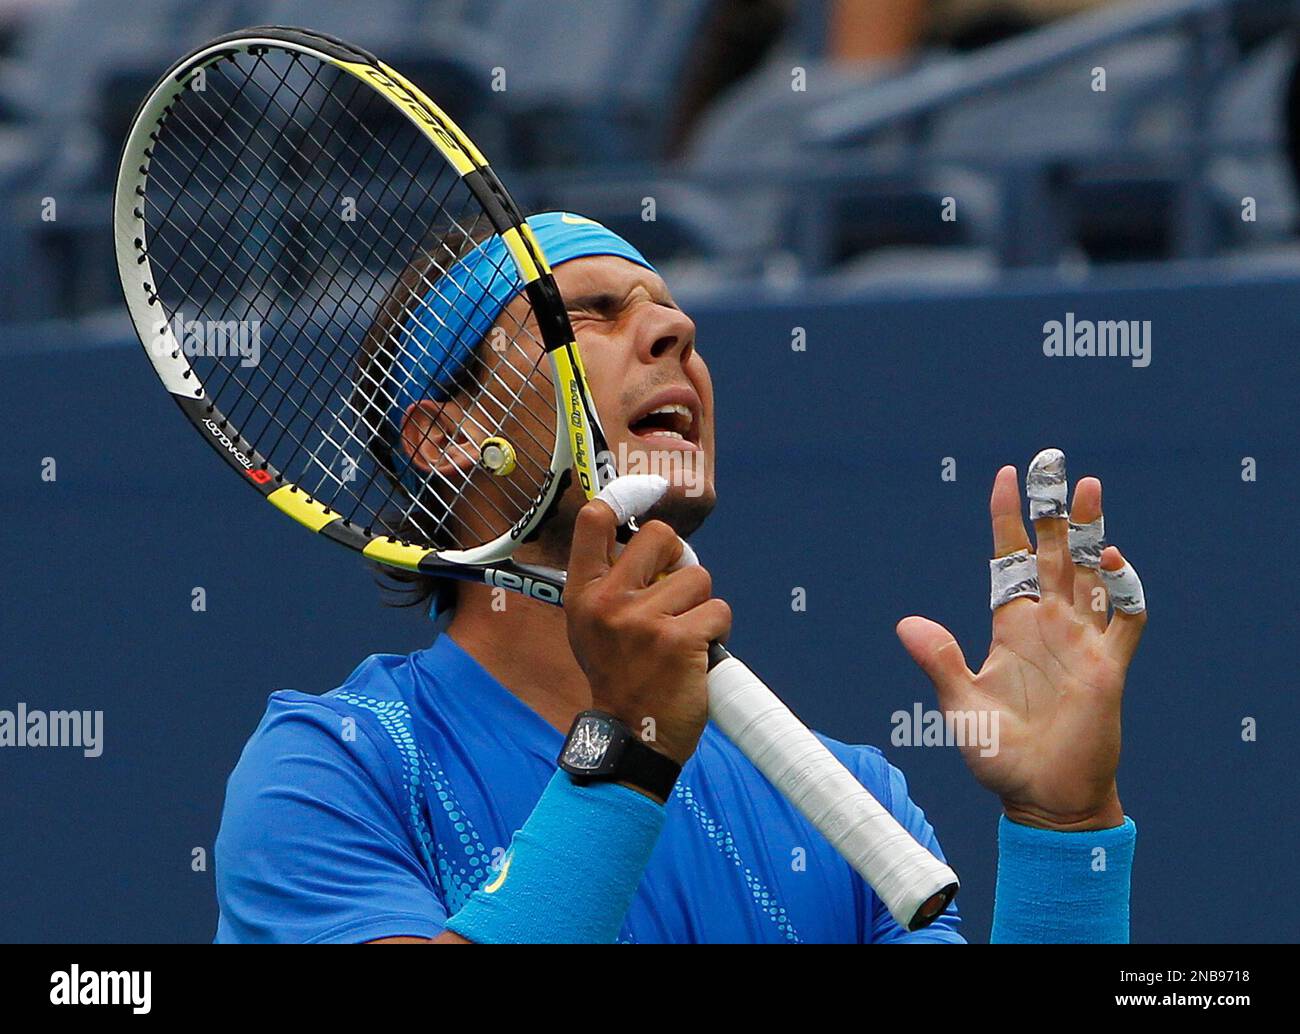 Rafael Nadal of Spain reacts during his match against Gilles Muller of  Luxembourg during the U.S. Open tennis tournament in New York, Wednesday,  Sept. 7, 2011. (AP Photo/Mike Groll Stock Photo - Alamy